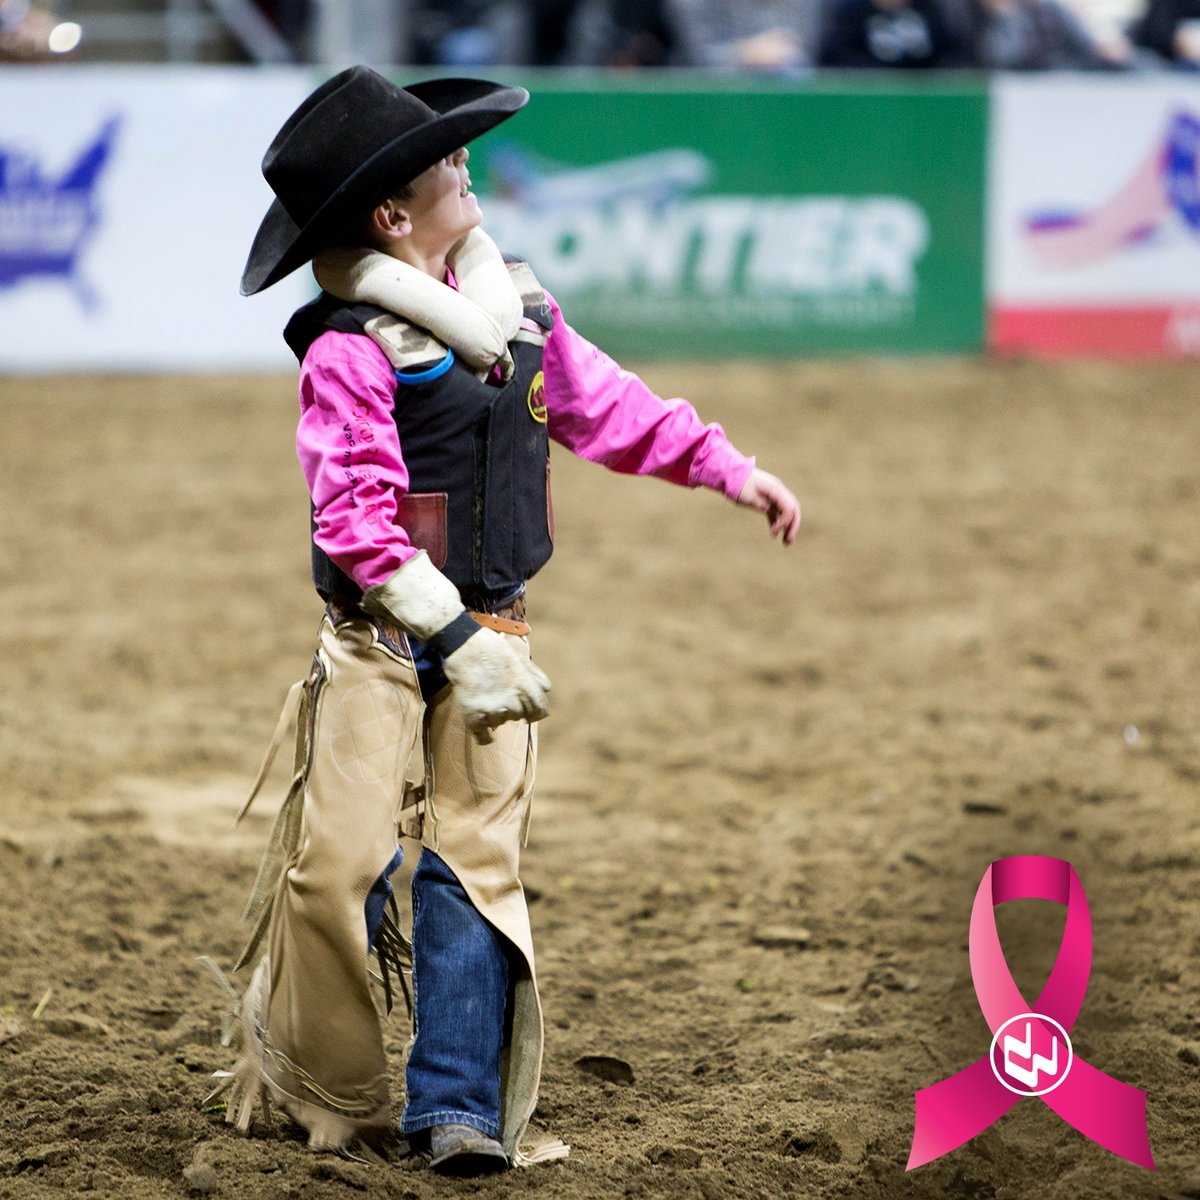 Hope everybody's in their pink today! The Pink Pro Rodeo presented by @Cigna starts tonight at 7pm. The @AmericanCancer Society will receive a $3 donation from each ticket purchased when you use the code CIGNA here: bit.ly/2u1NYiu

#CignaPinkRodeo #CignaMountainStates